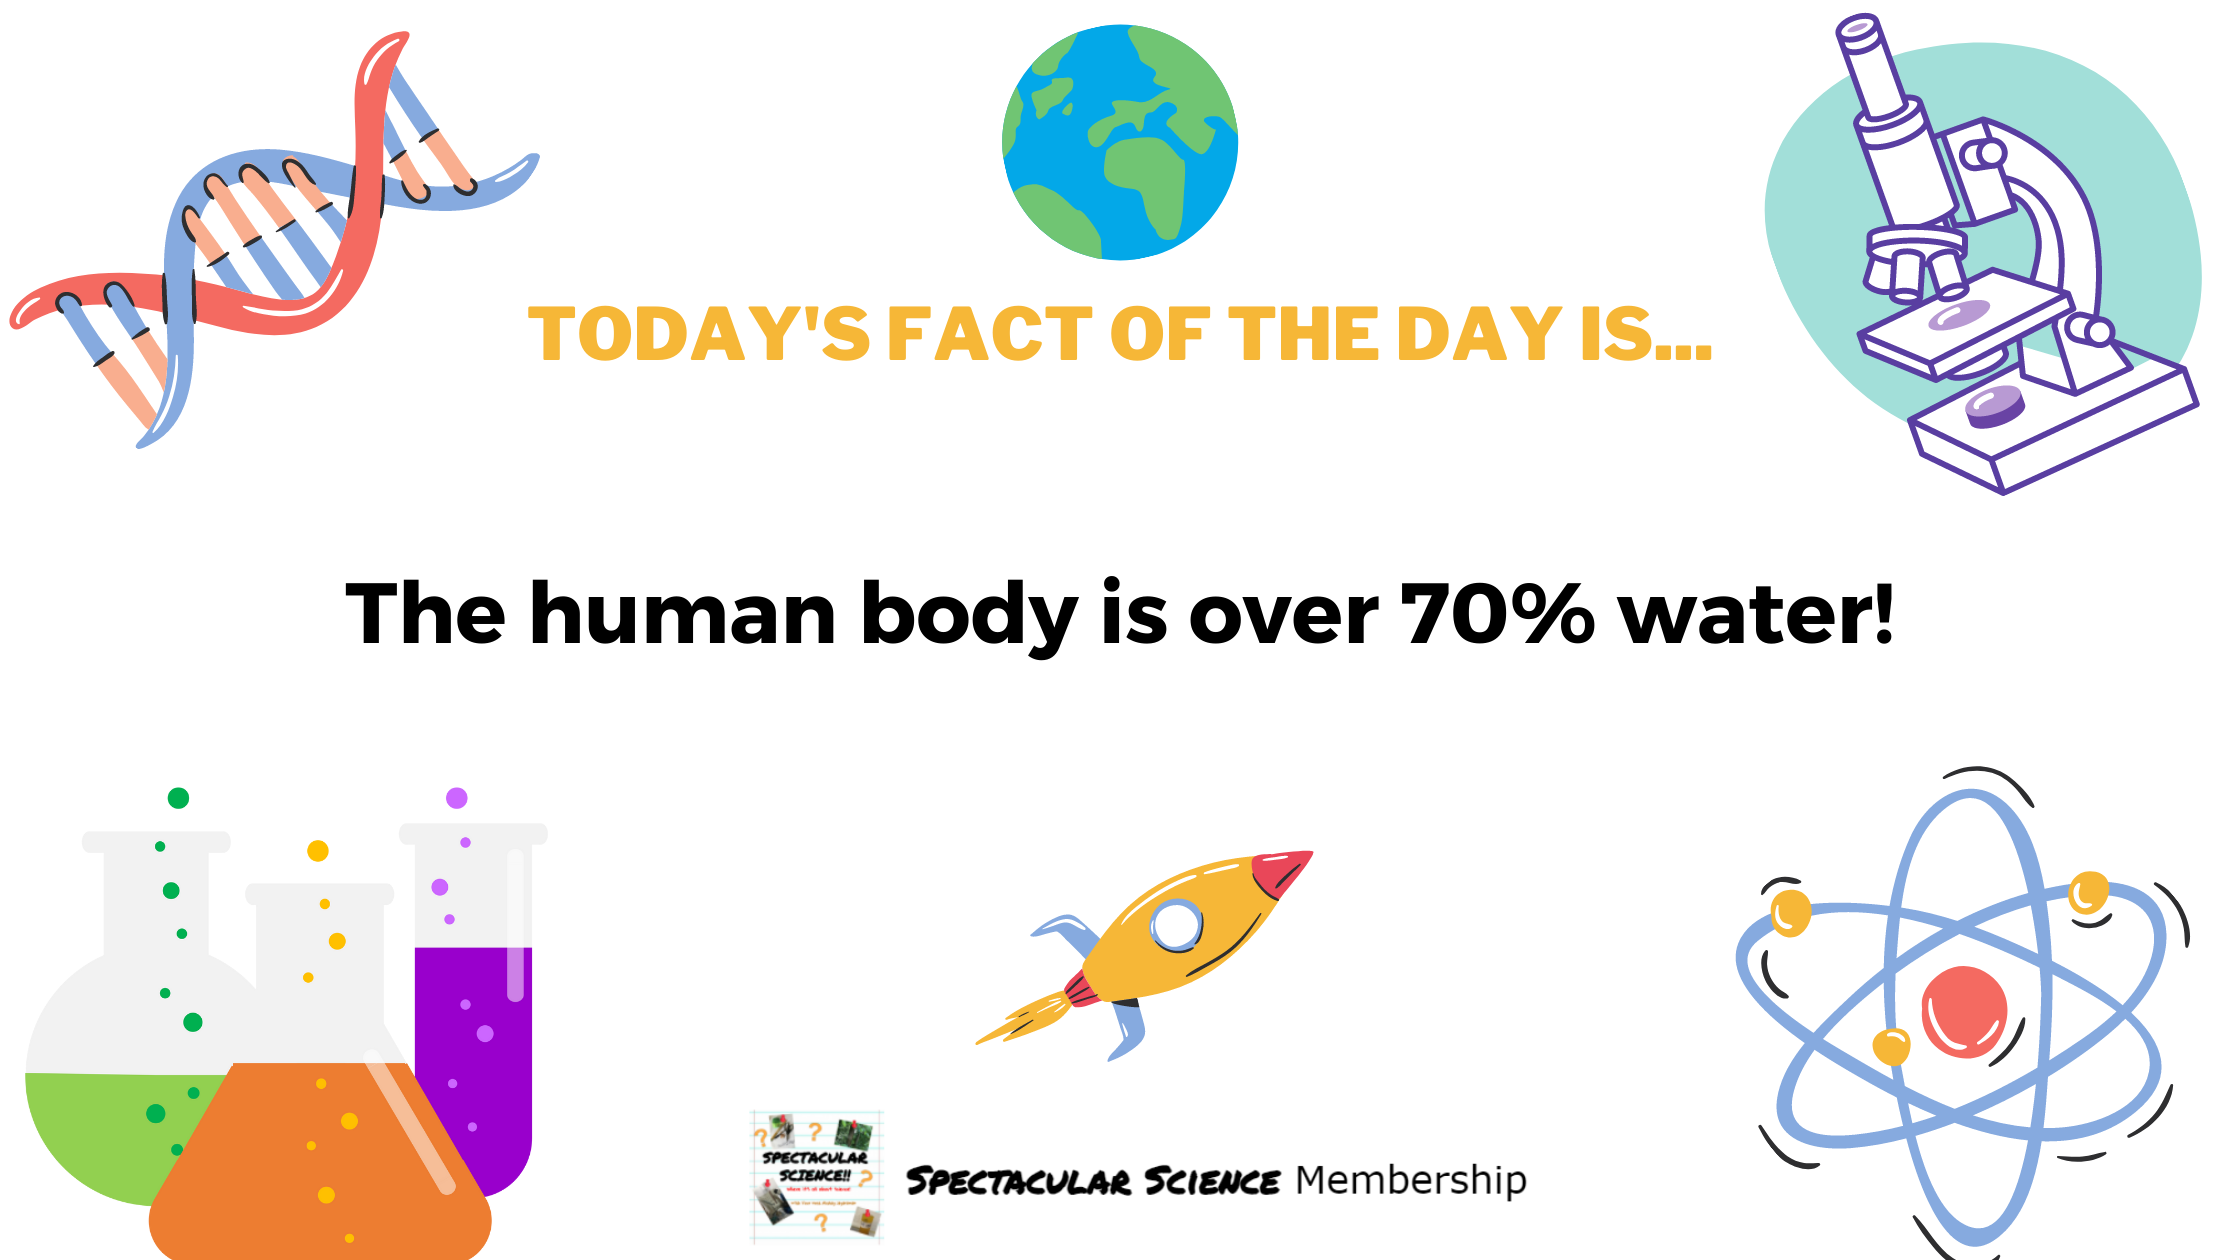 Fact of the Day Image Jan. 14th